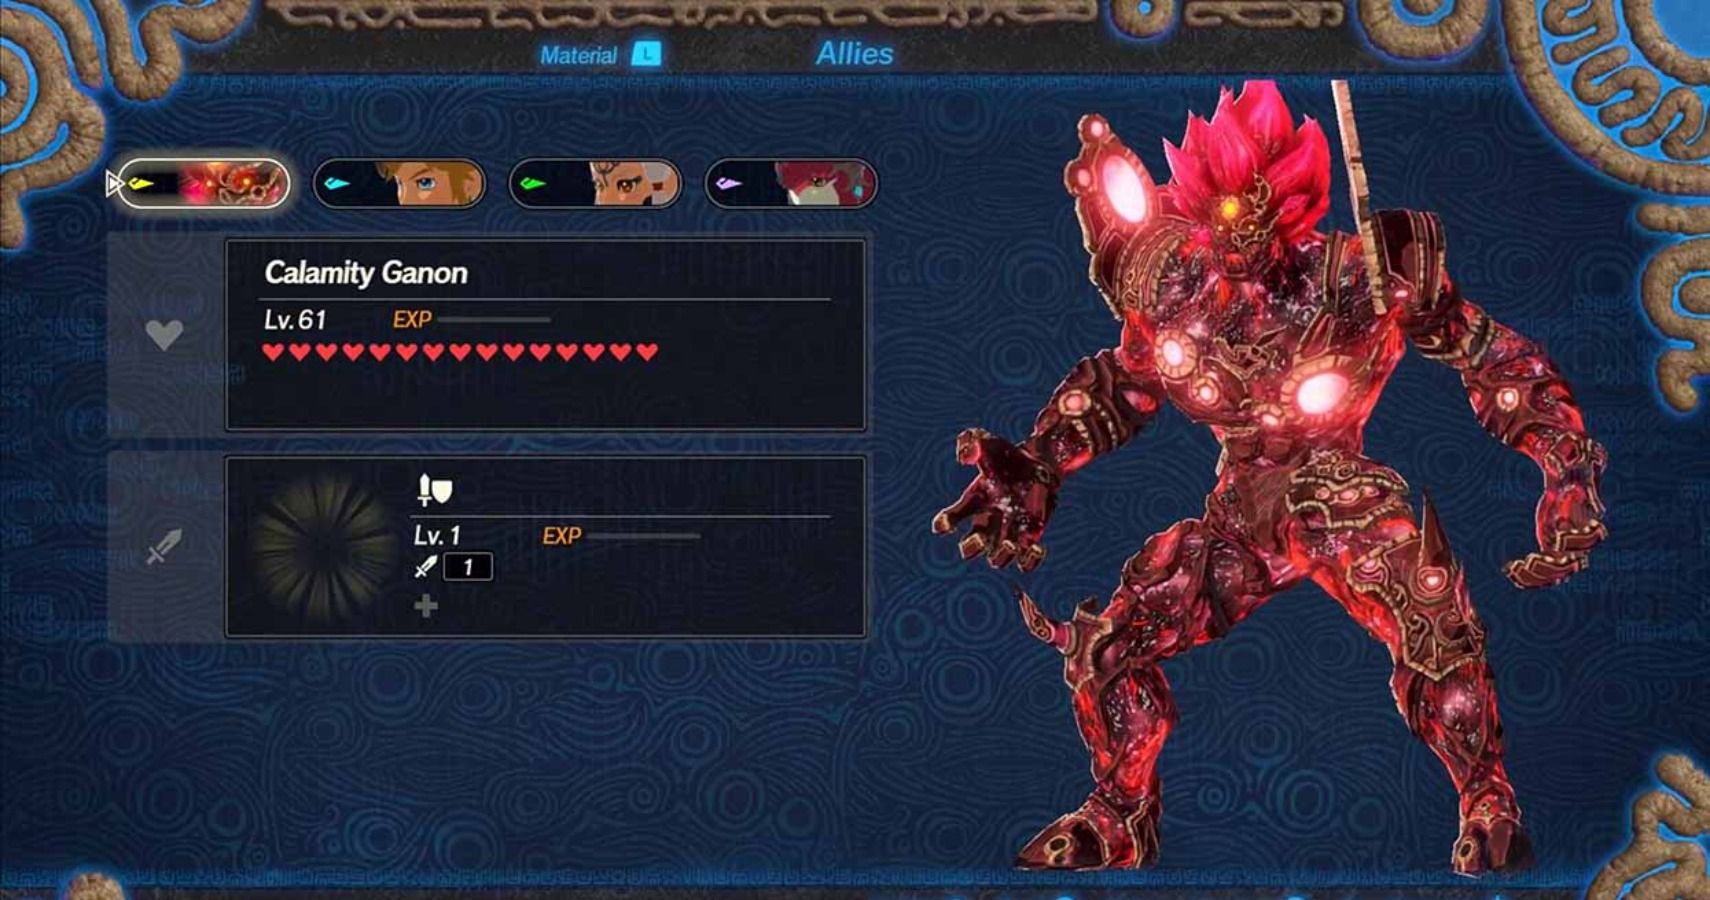 How To Unlock Calamity Ganon In Hyrule Warriors Age Of Calamity